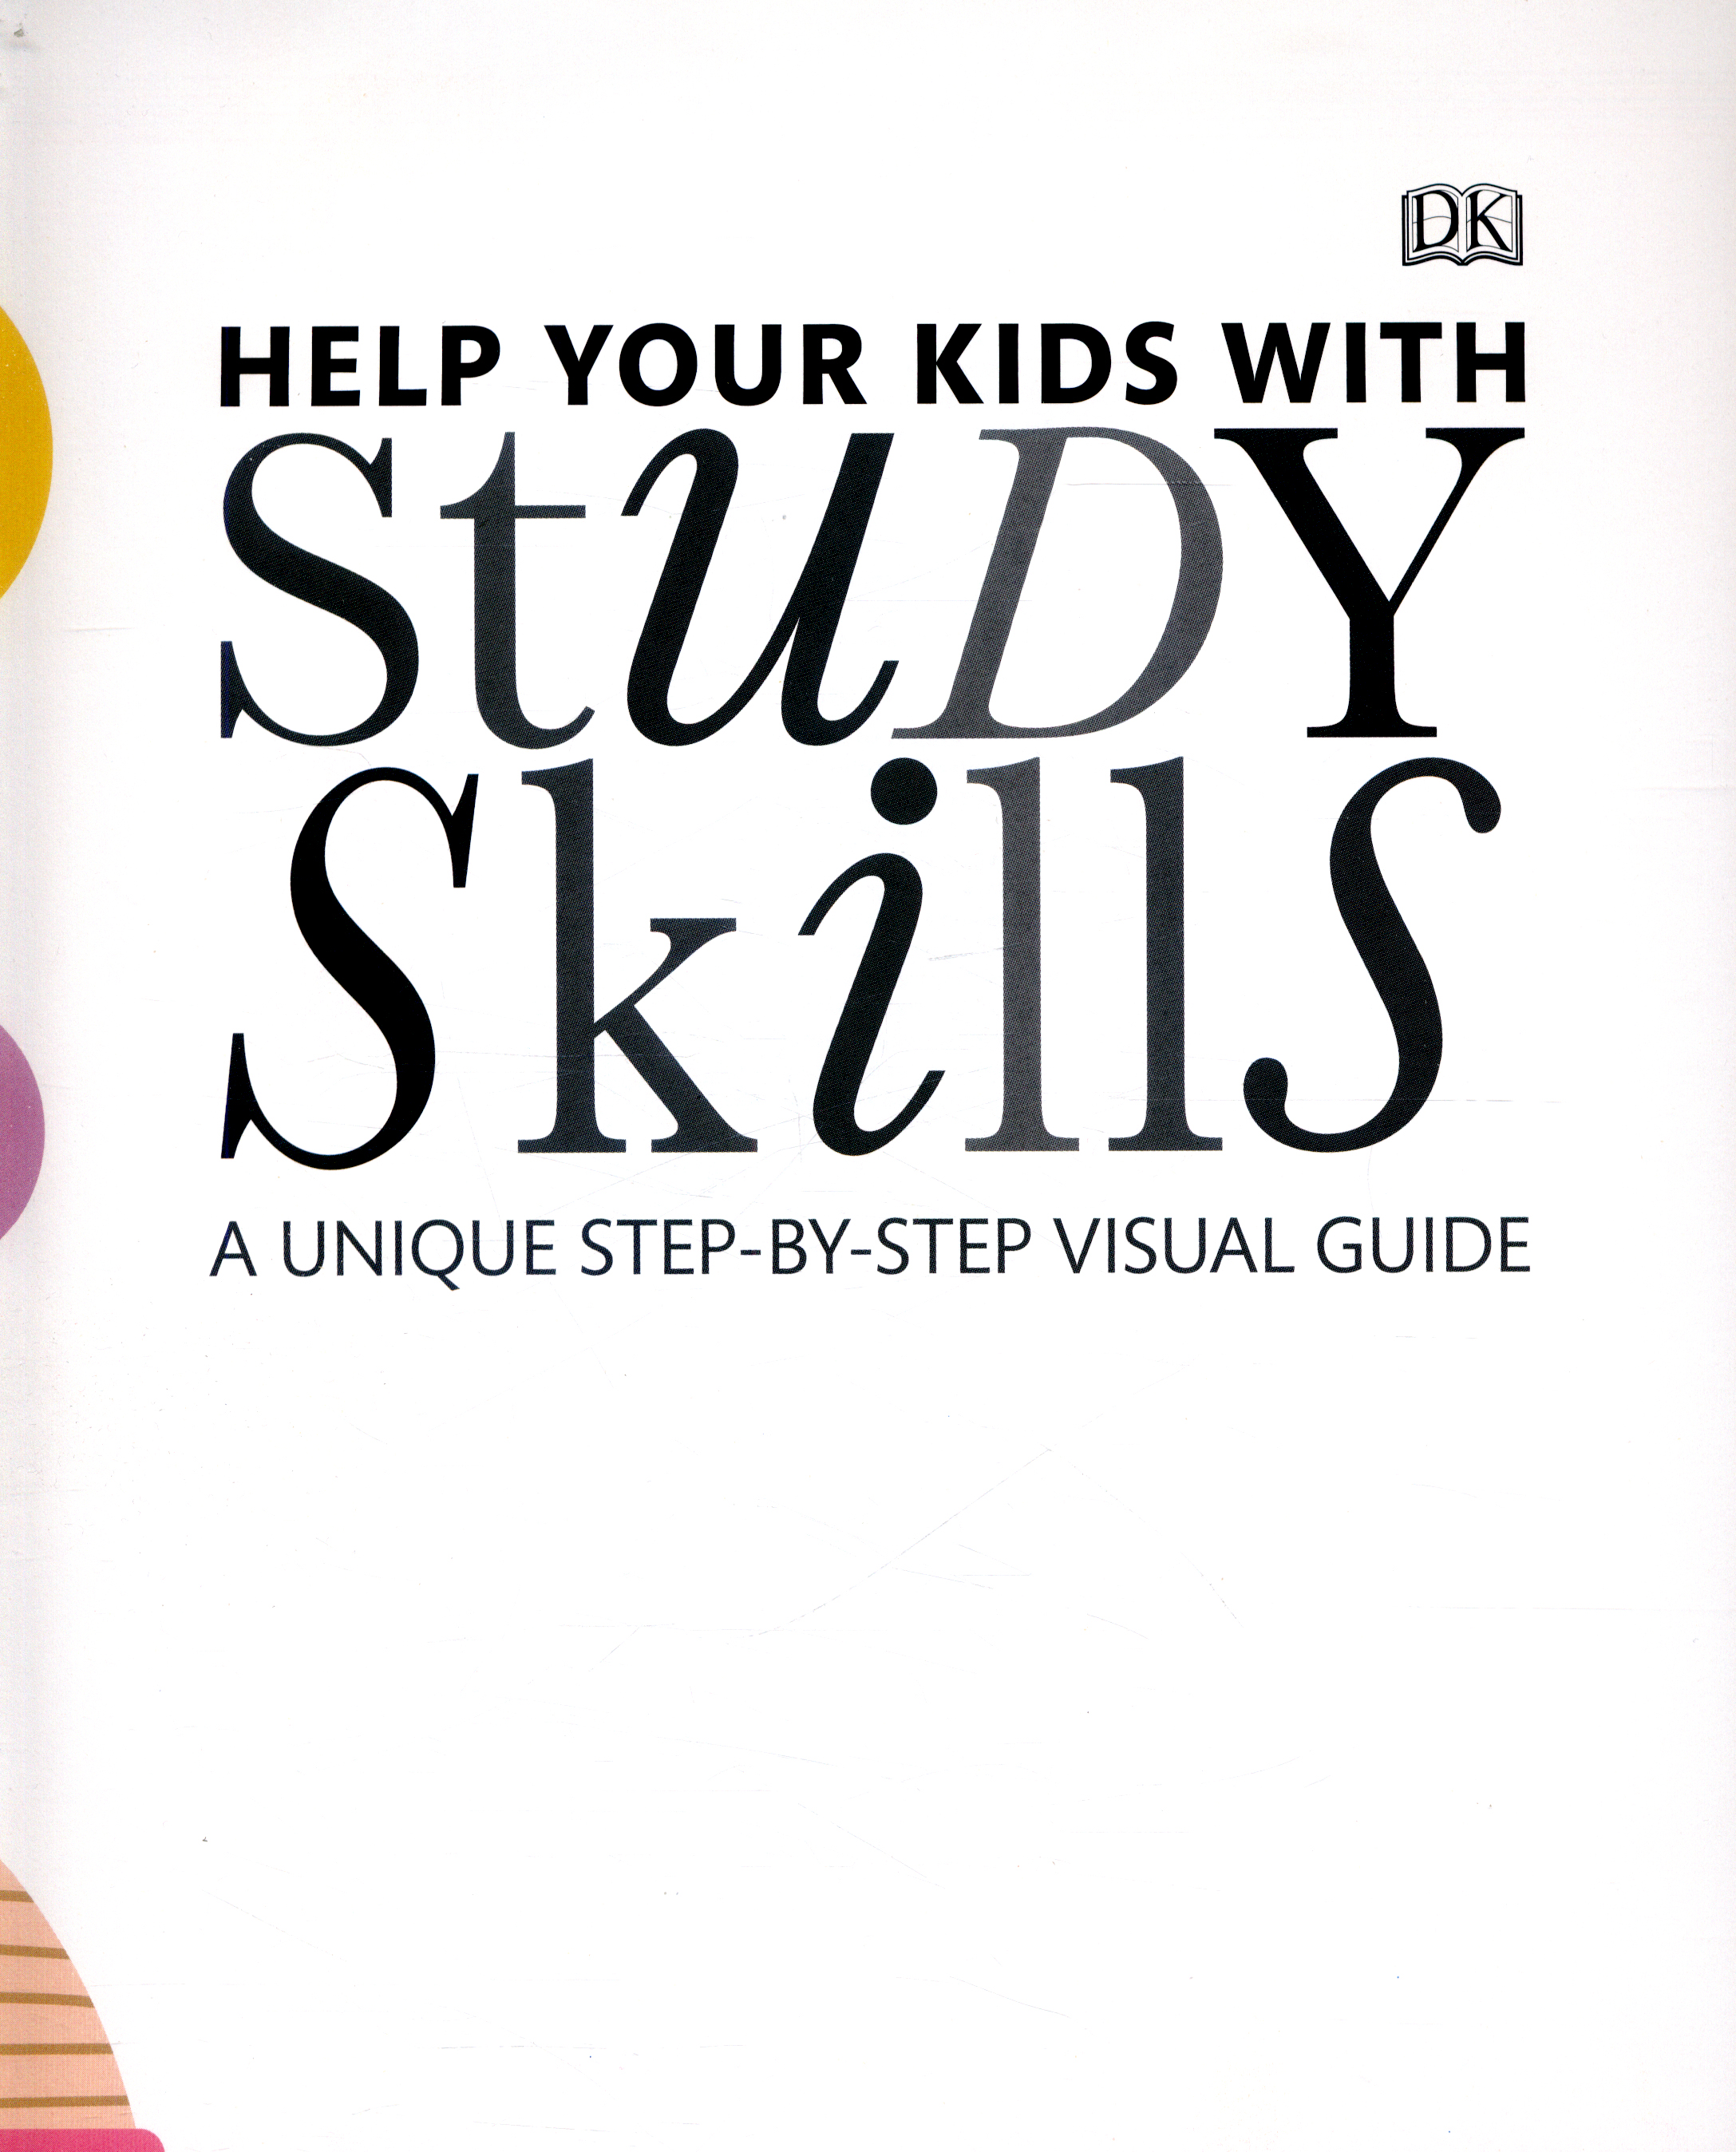 Help your kids with study skills : a unique step-by-step visual guide